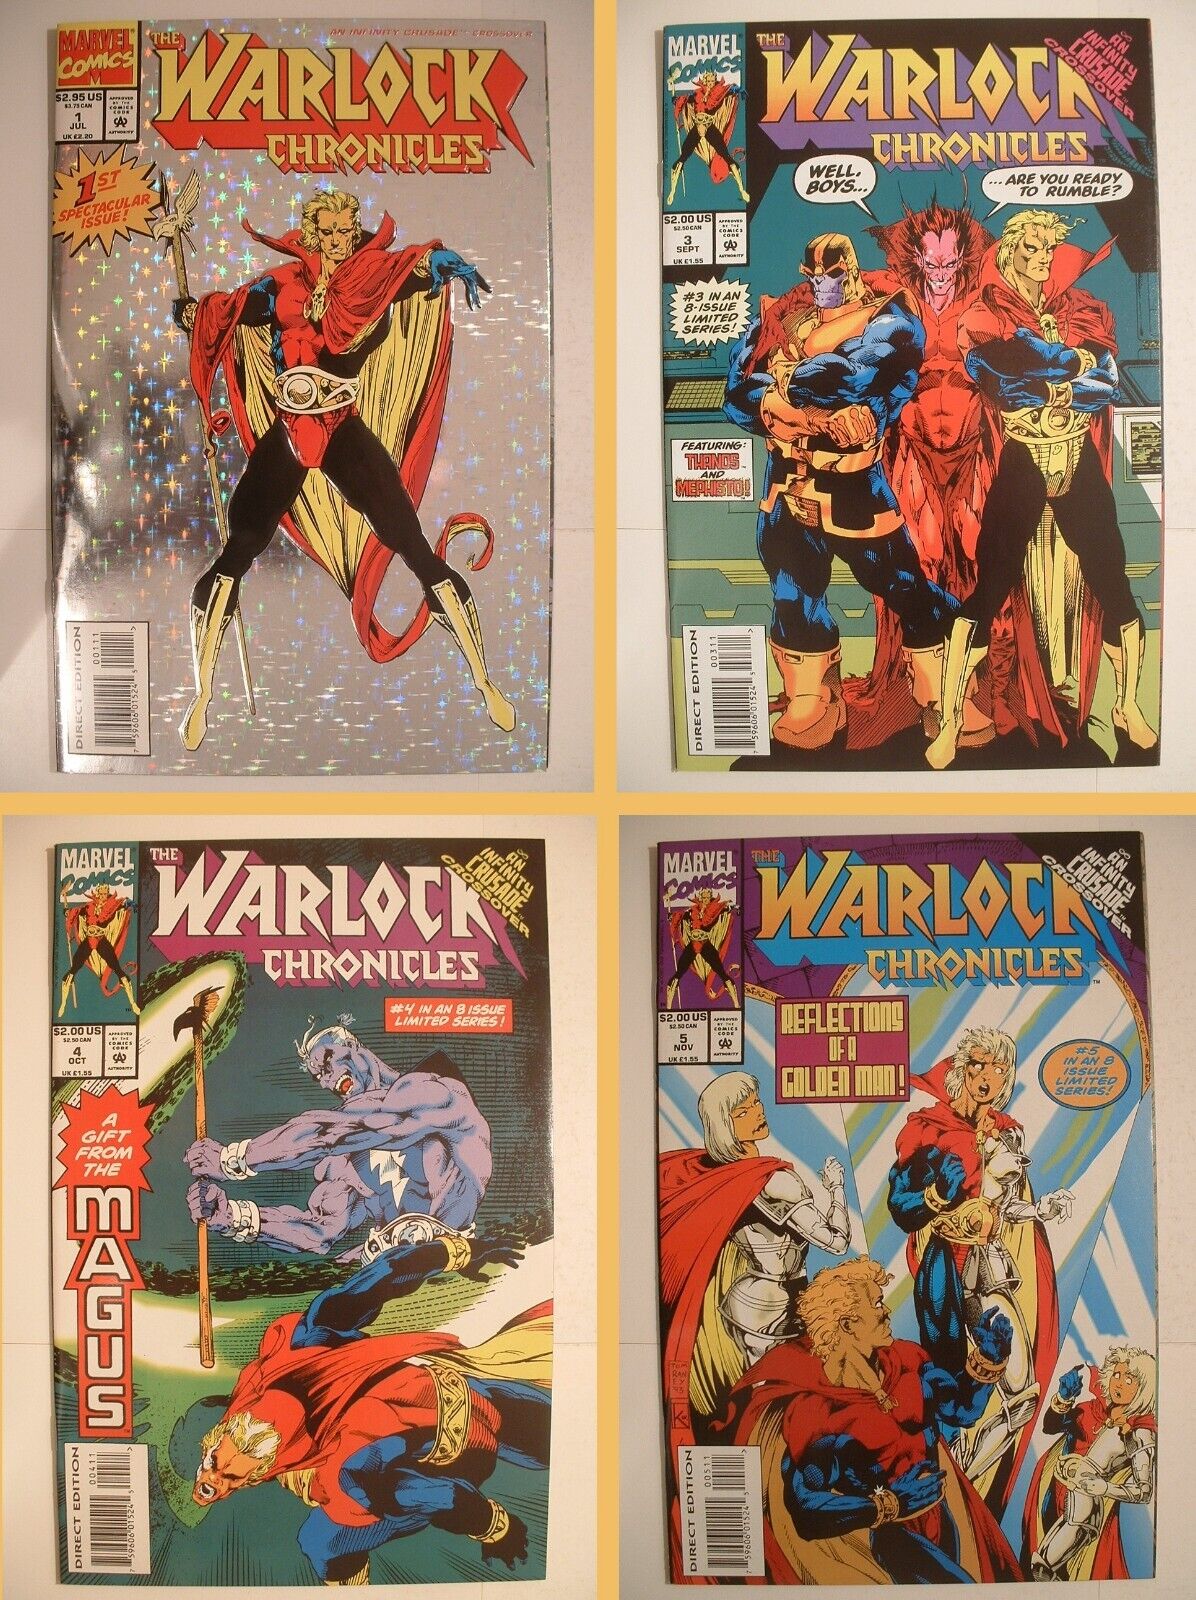 Warlock Chronicles Lot - Marvel 1993 - #1, 3, 4 and 5! Four Issues!